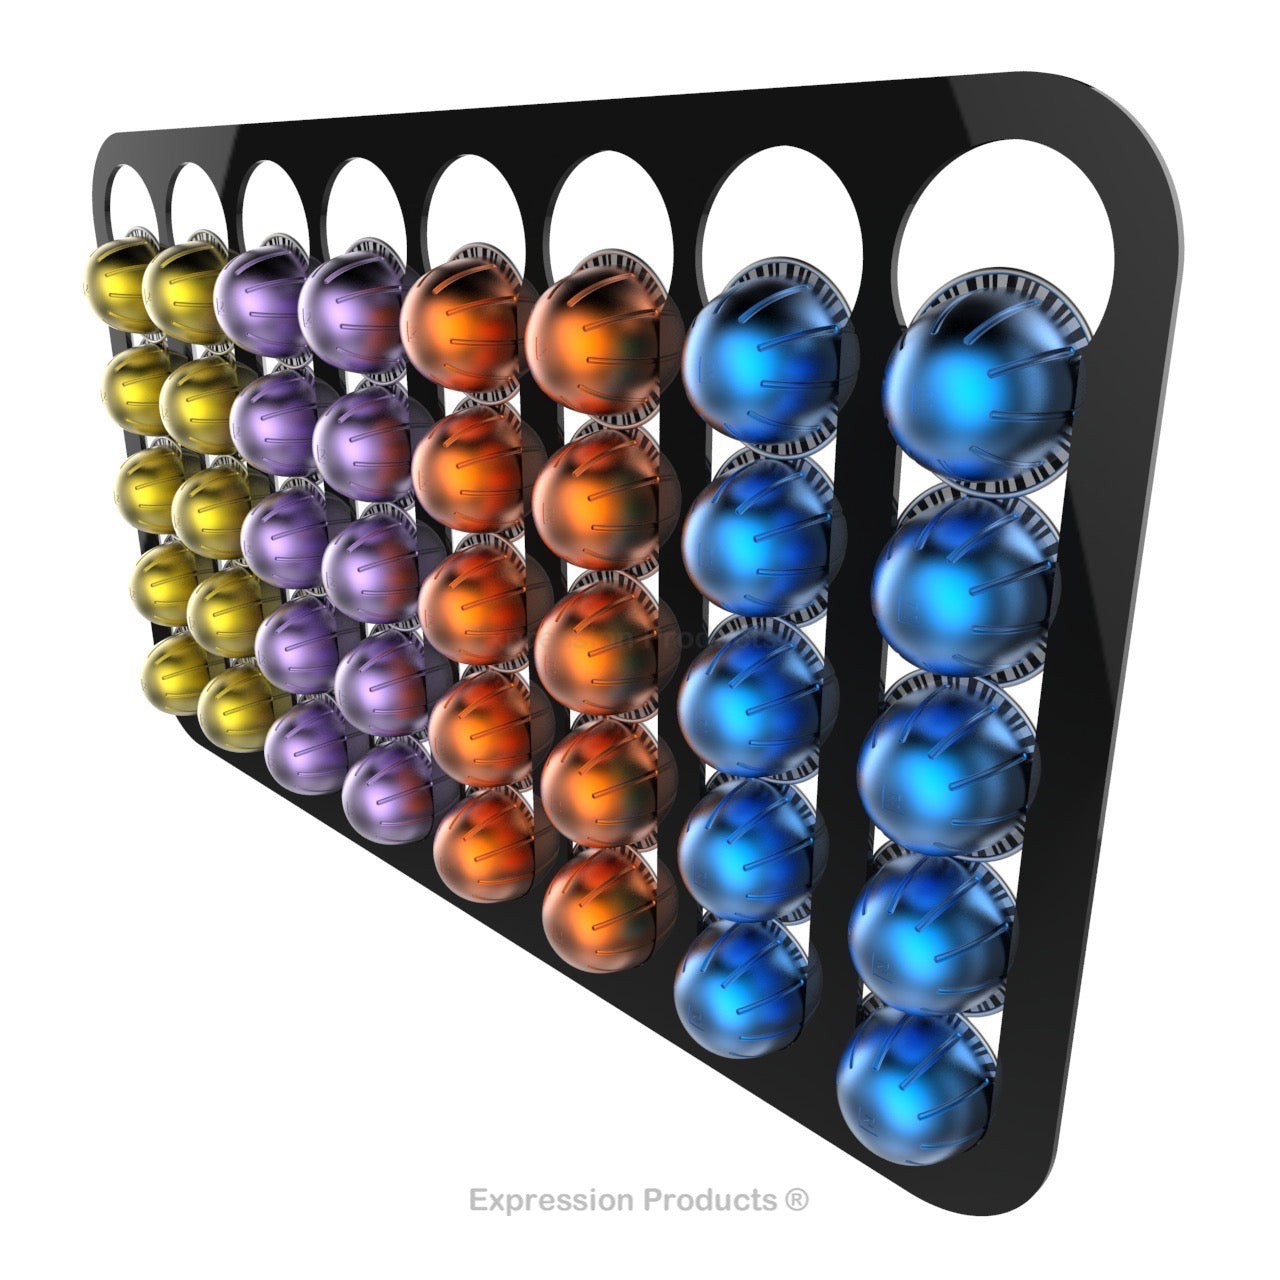 Nespresso Vertuo Coffee Pod Holder - Wall Mounted - Expression Products Ltd